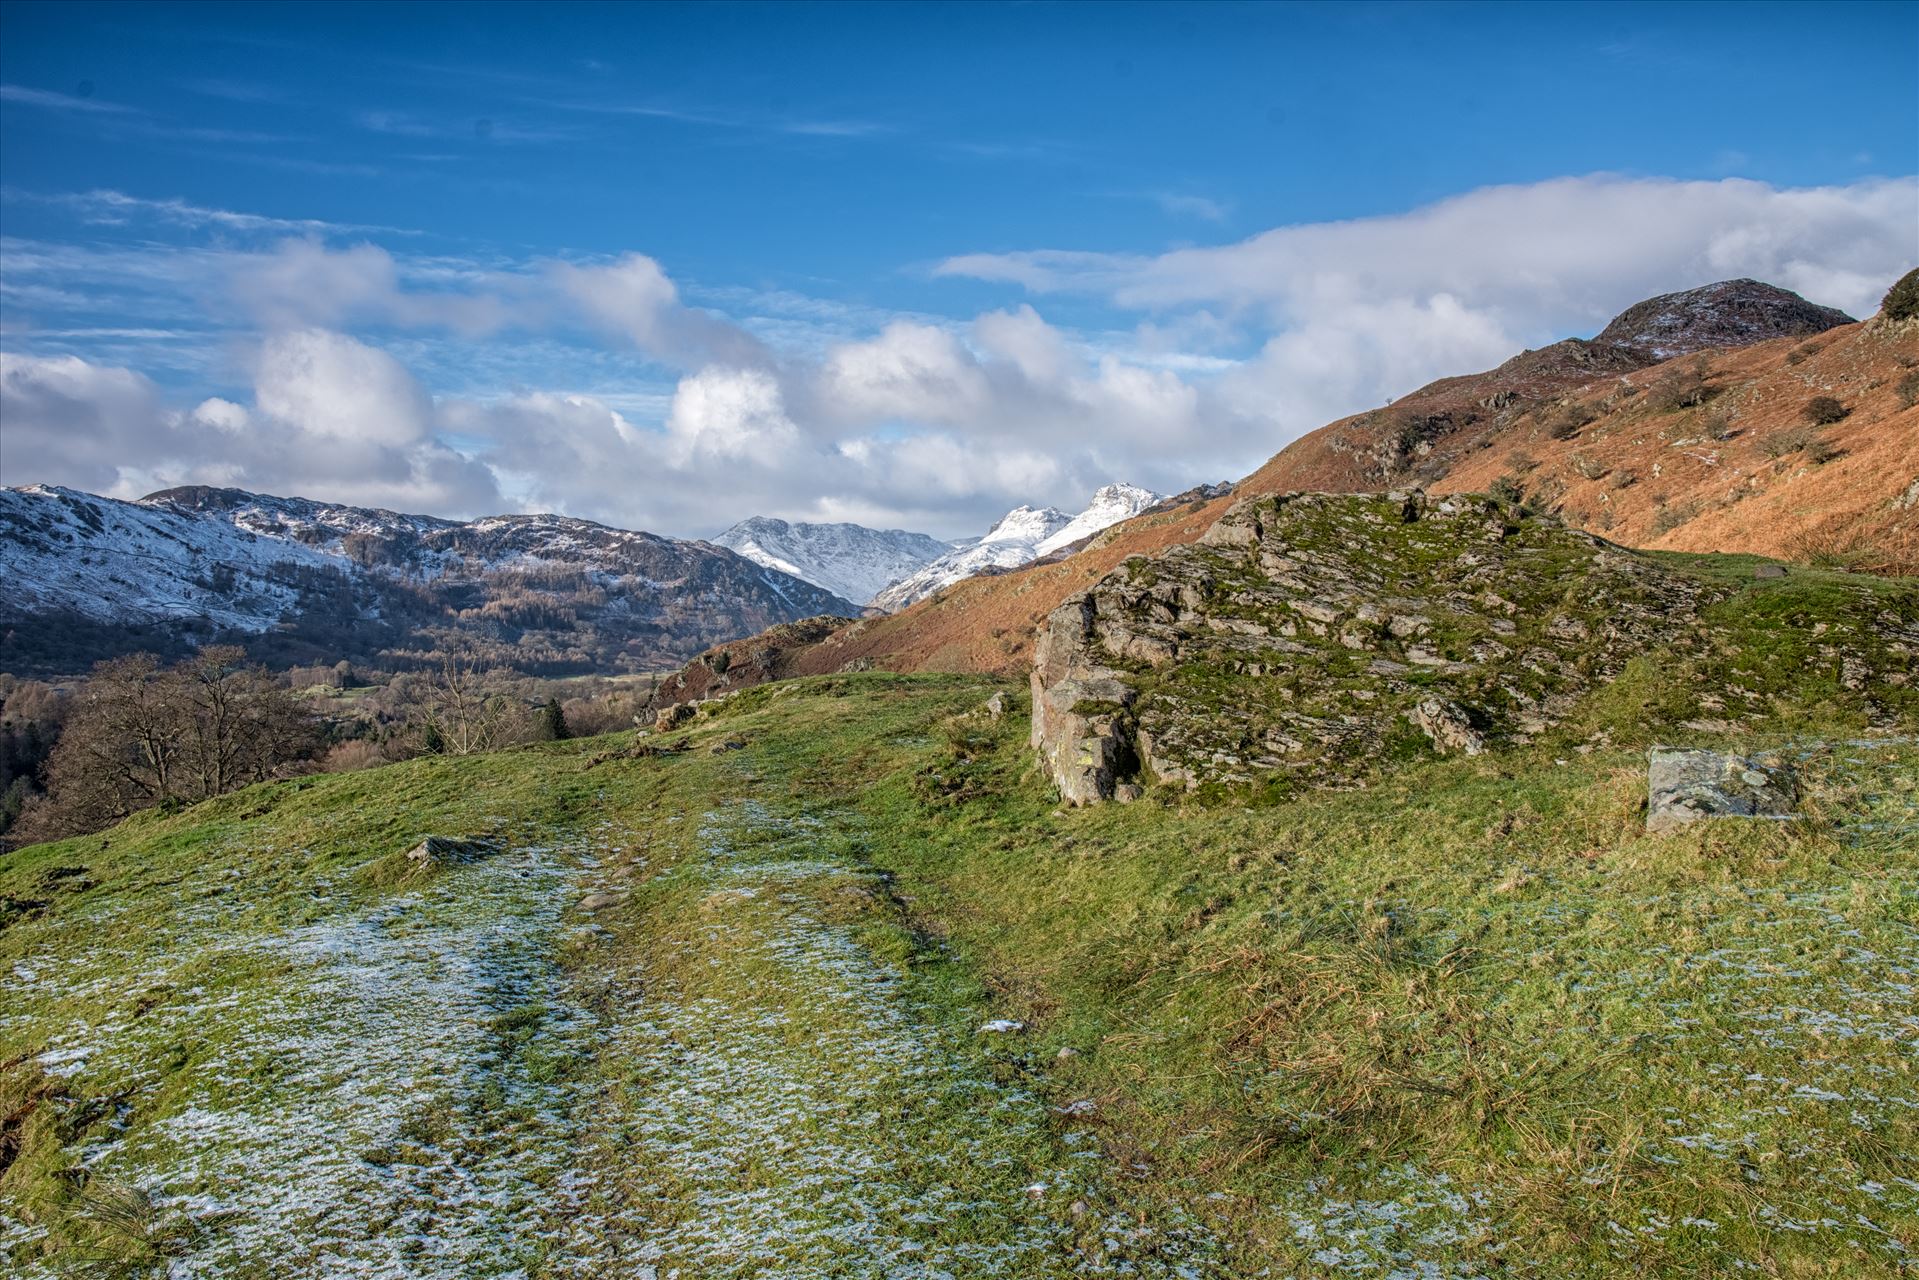 Snowy mountains - A snowy landscape shot taken in the Langdale area of the Lake District. by philreay